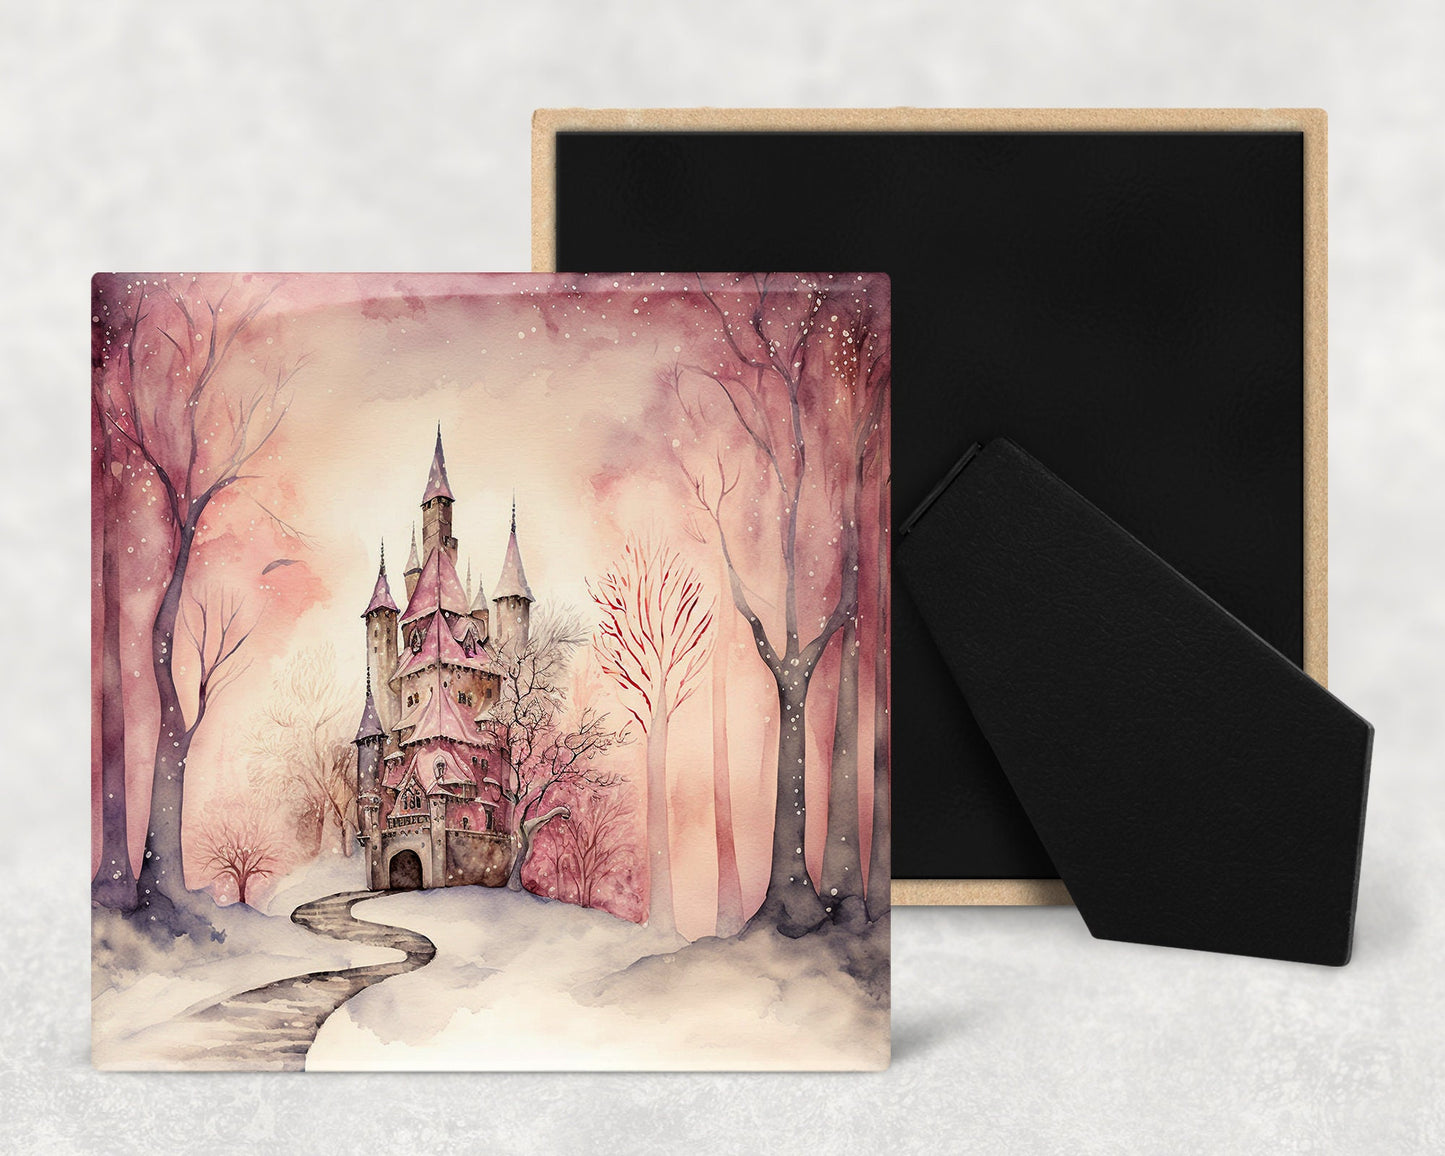 Fairy Tale Castle Art Decorative Ceramic Tile Set with Optional Easel Back - Available in 4 sizes - Set of 4